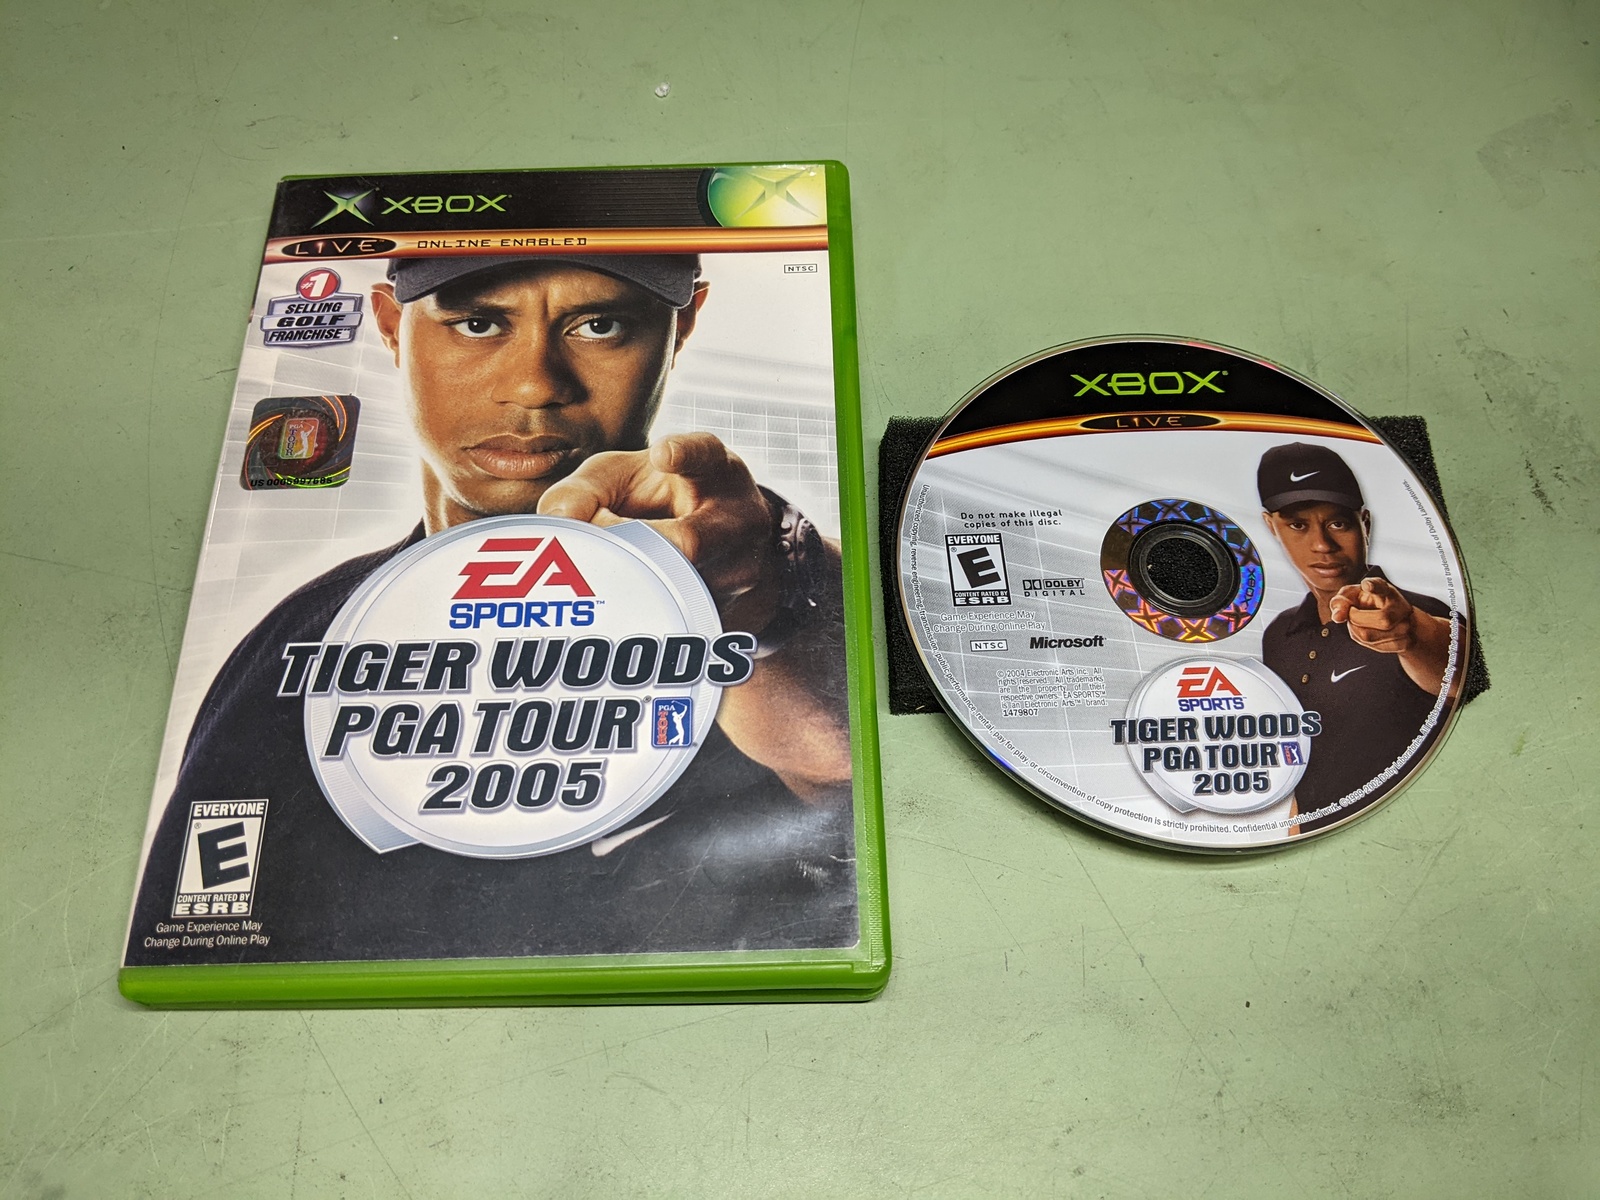 Primary image for Tiger Woods PGA Tour 2005 Microsoft XBox Disk and Case